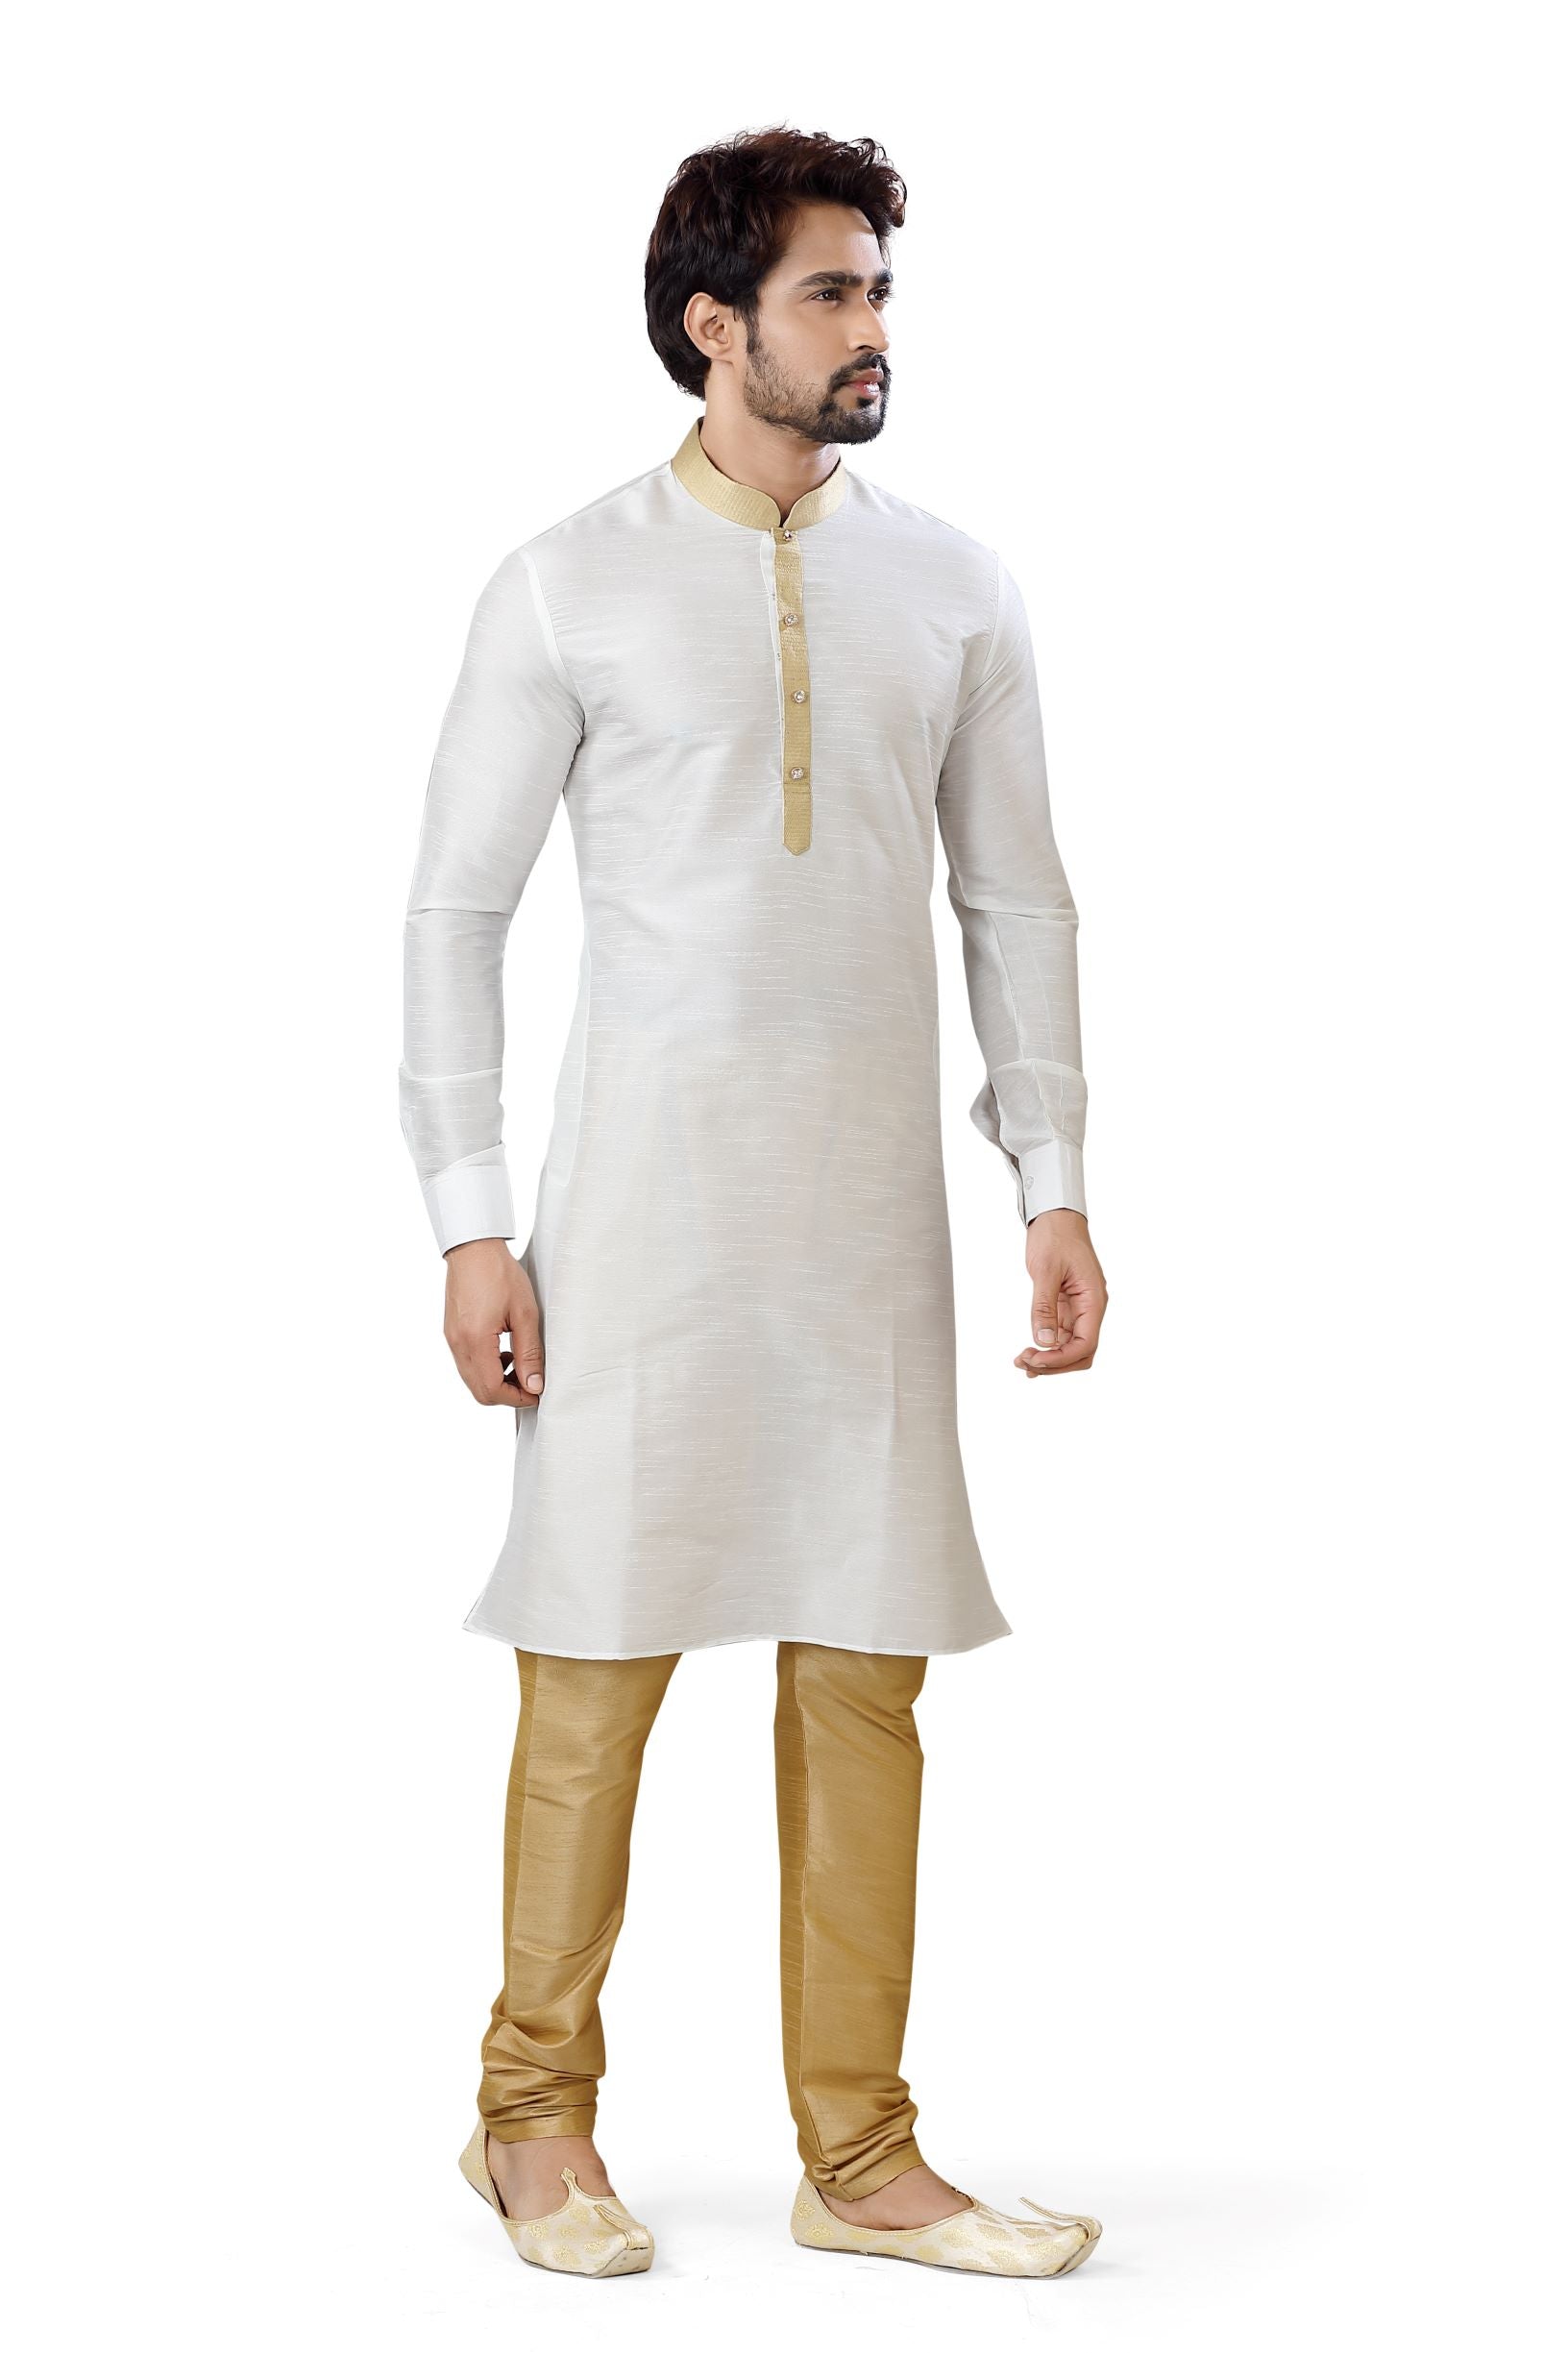 Clearance - Anchor embroidery Kurta pajama in White color